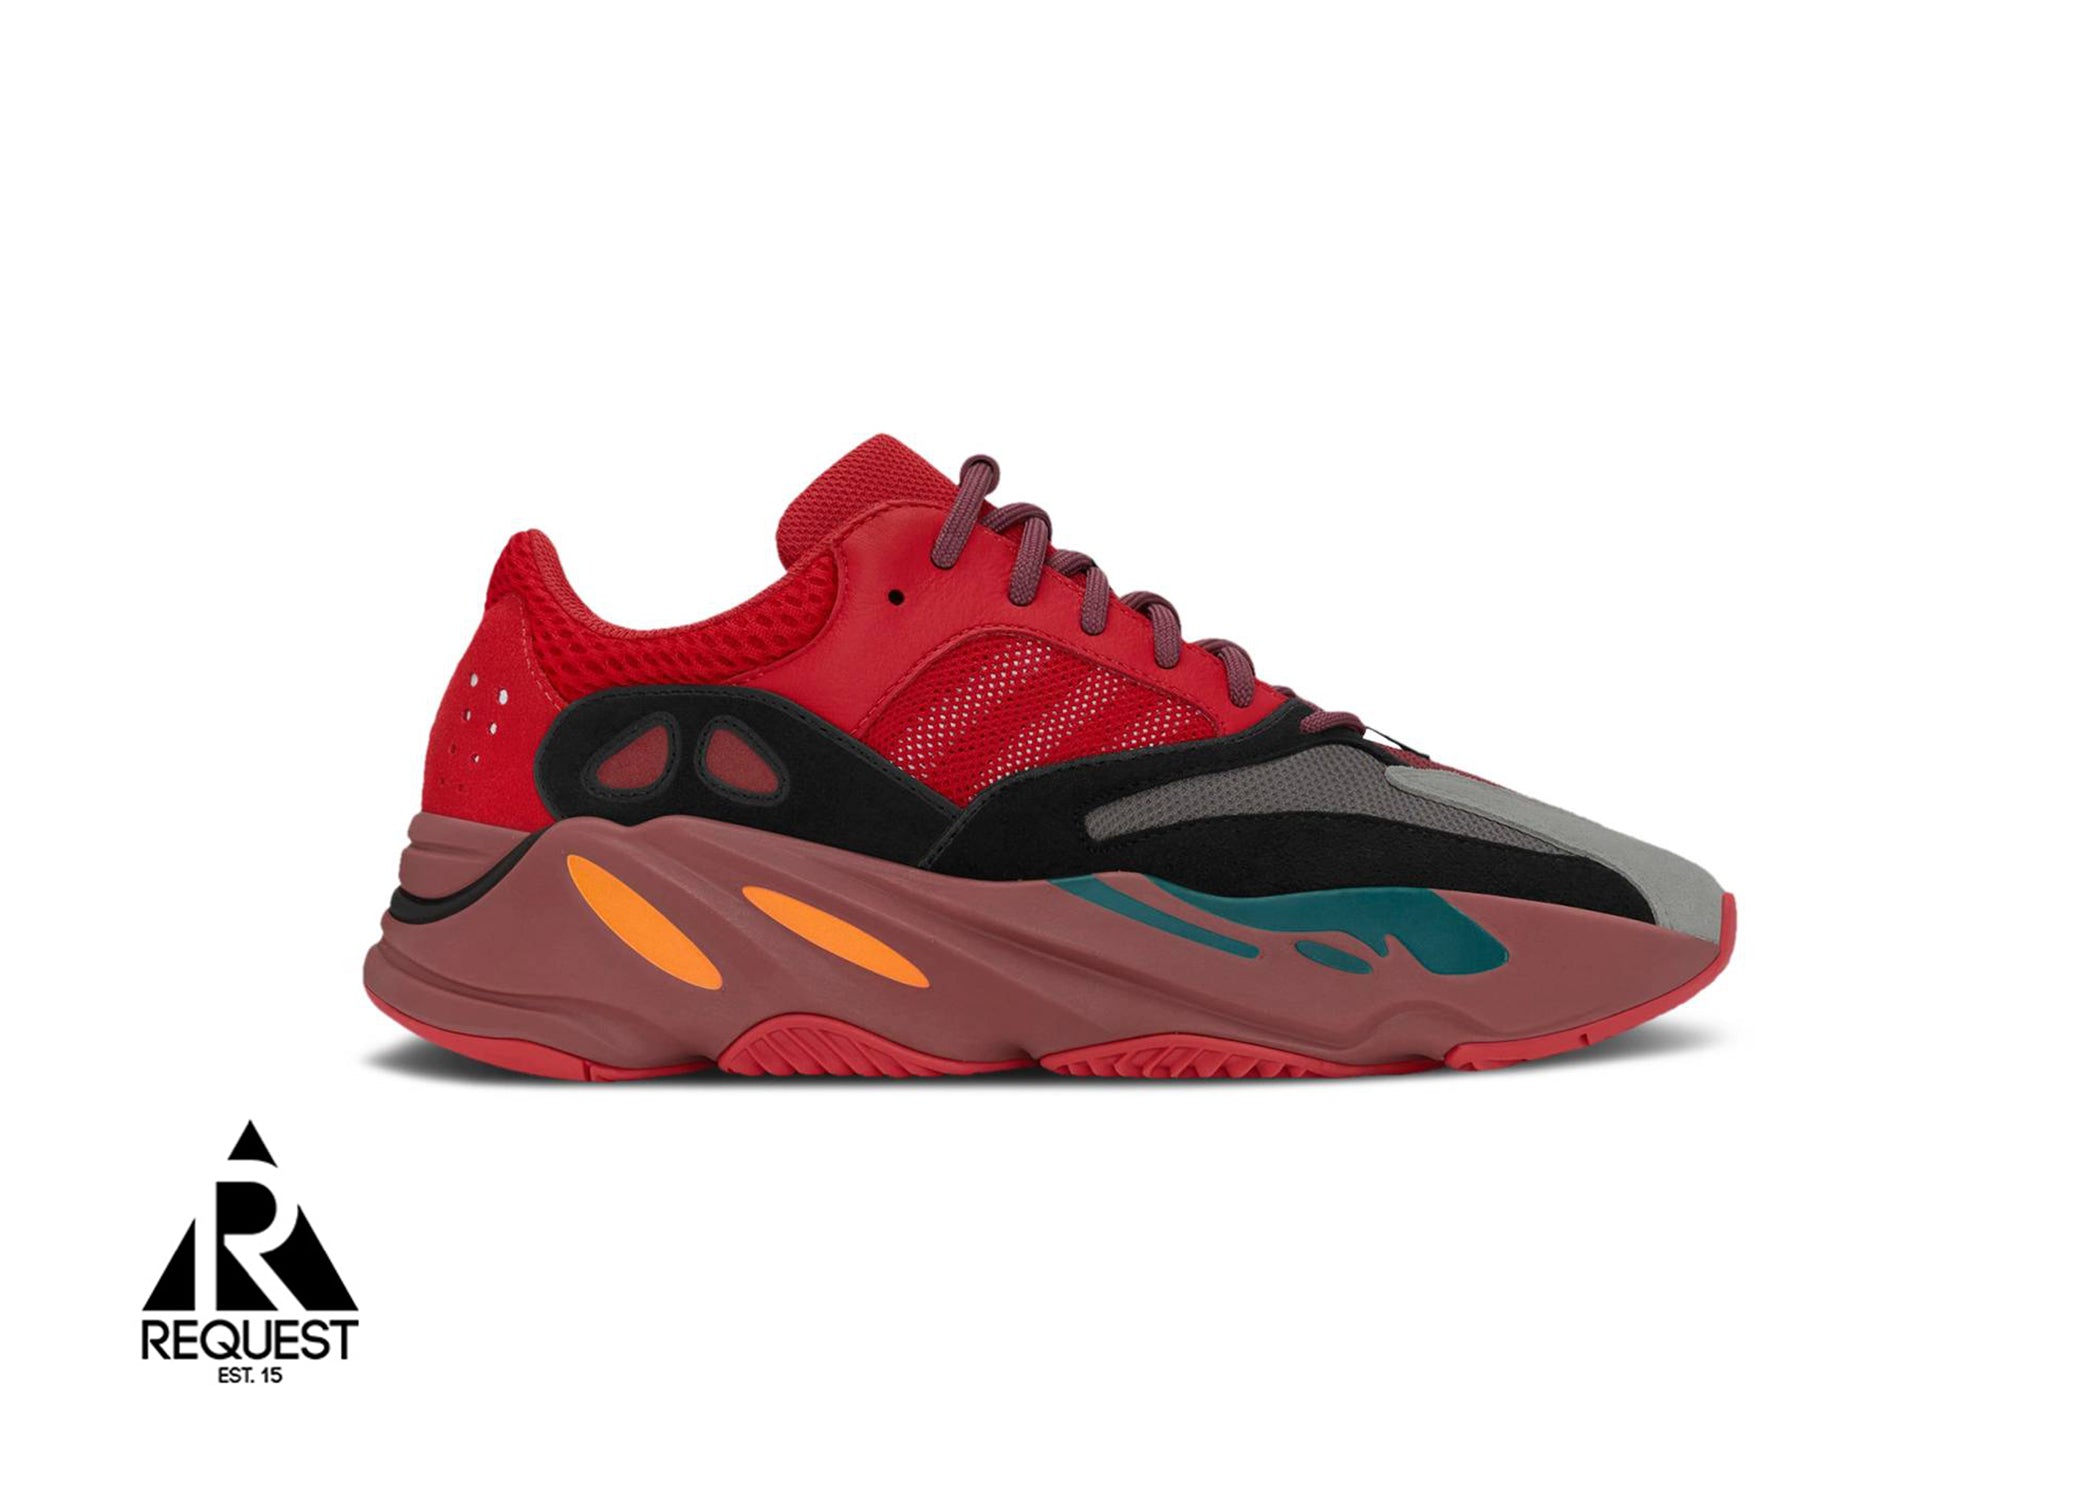 Adidas Yeezy Boost 700 "Hi-RES Red"